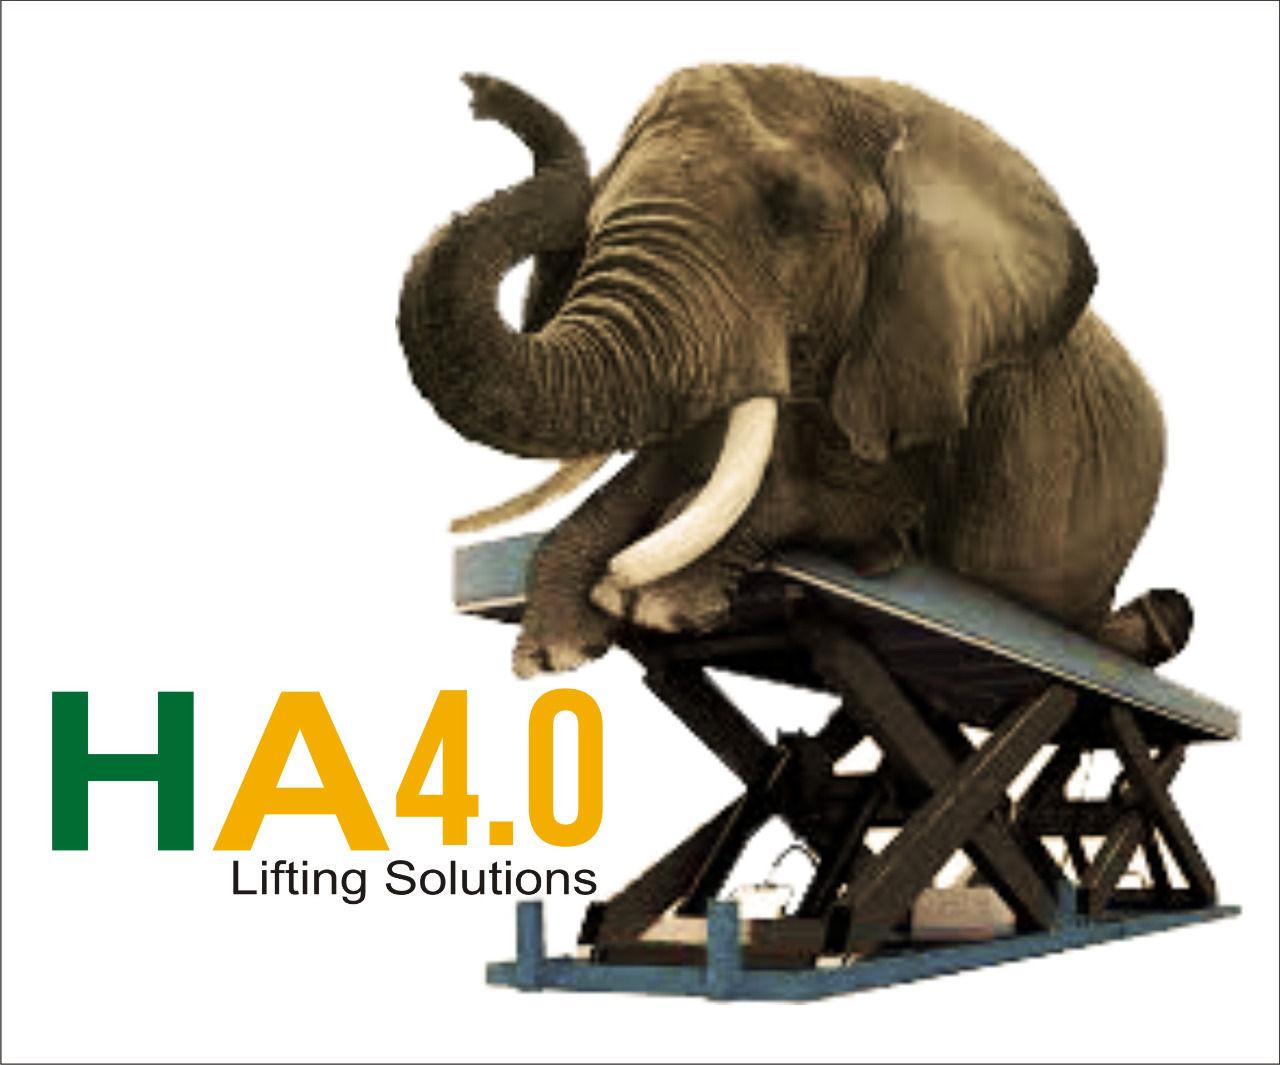 HA4.0 MANUFACTURING PRIVATE LIMITED